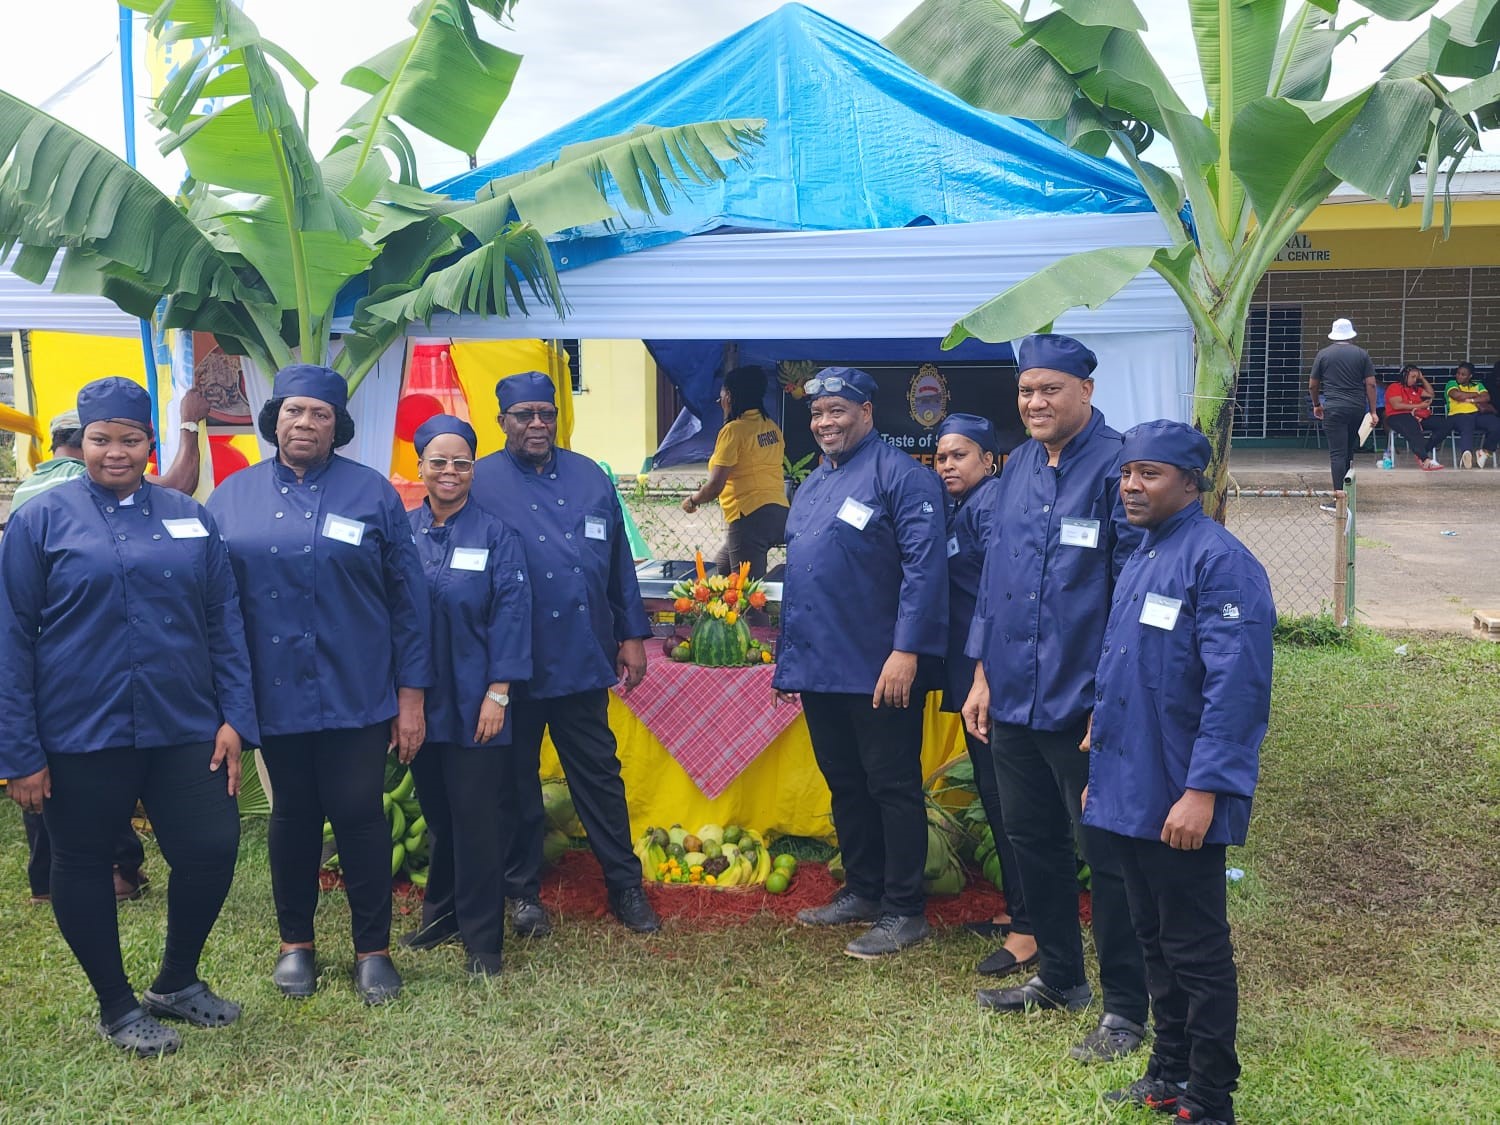 St. Mary Municipal Corporation brings the heat -Cops culinary conquest at Local Government & Community Month 2023 Cook-Off Competition